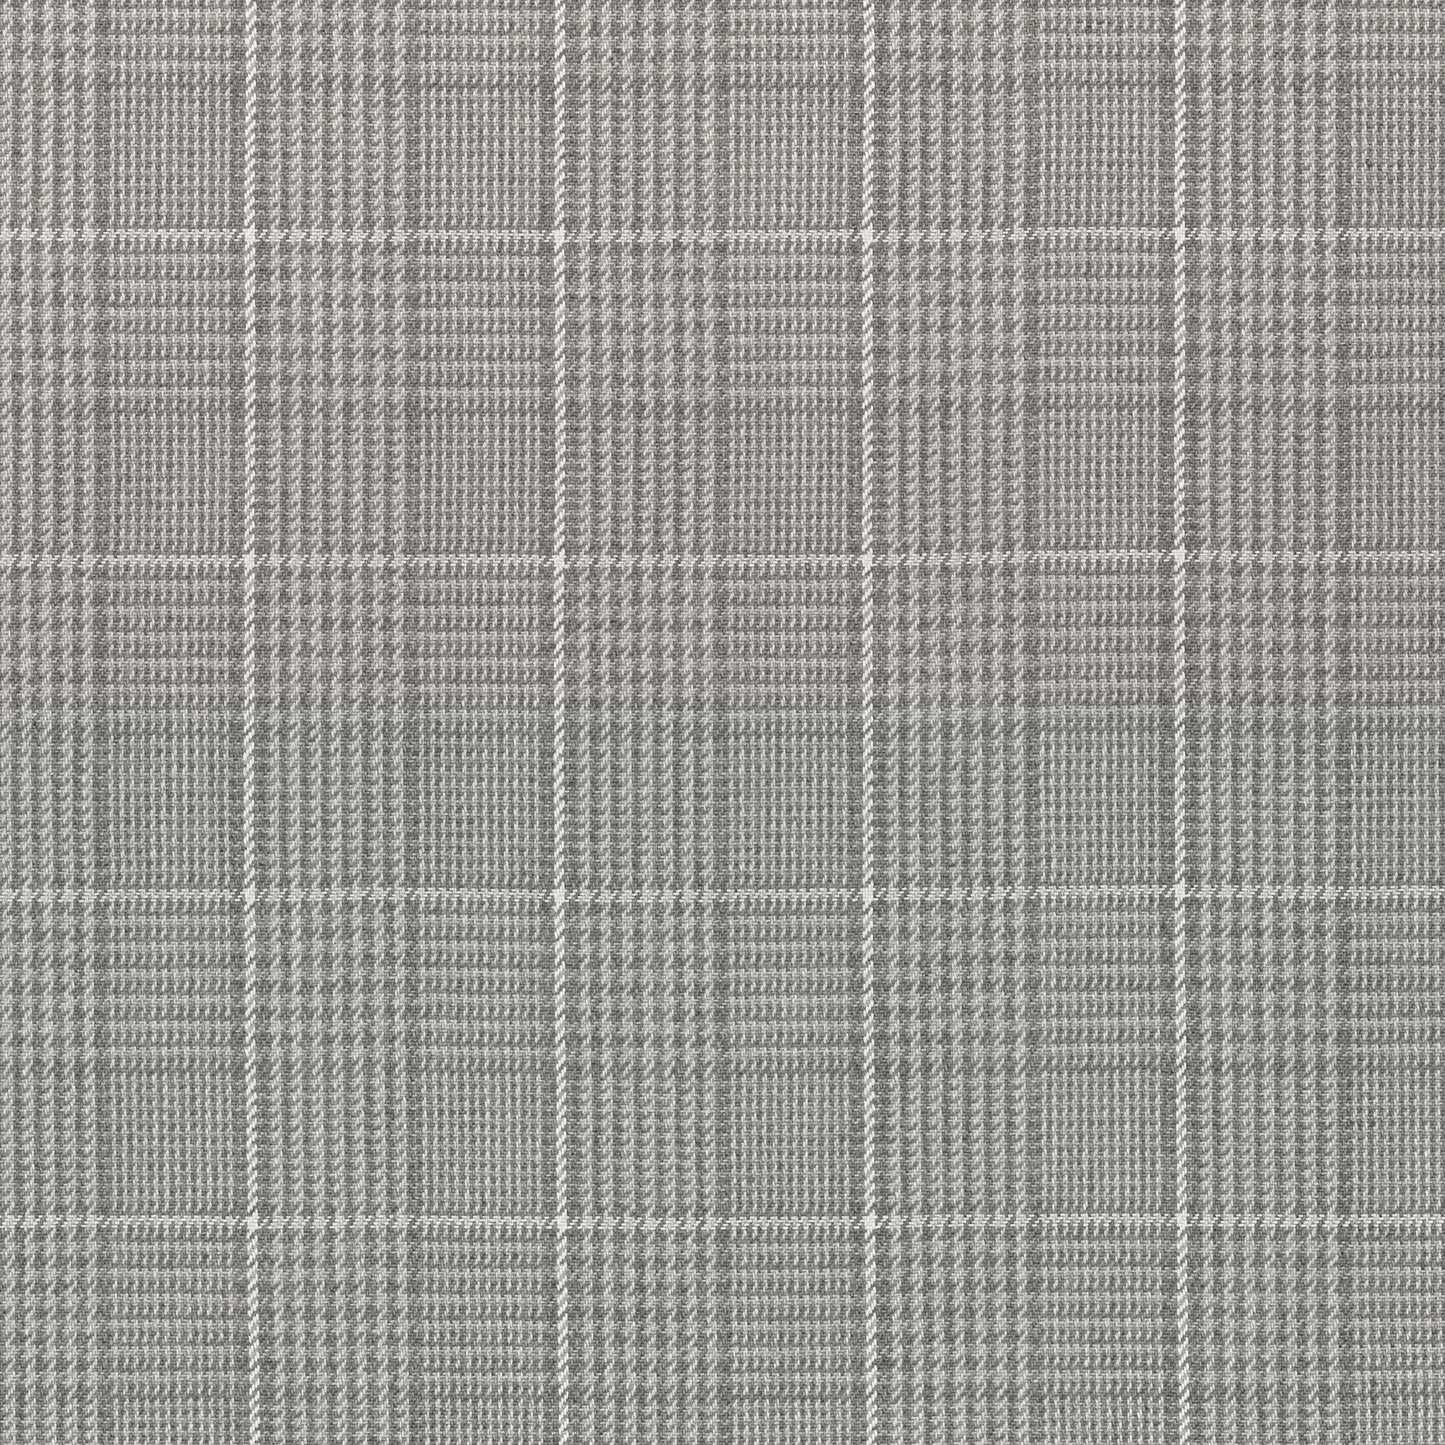 Purchase Thibaut Fabric Item W710200 pattern name Grassmarket Check color Grey